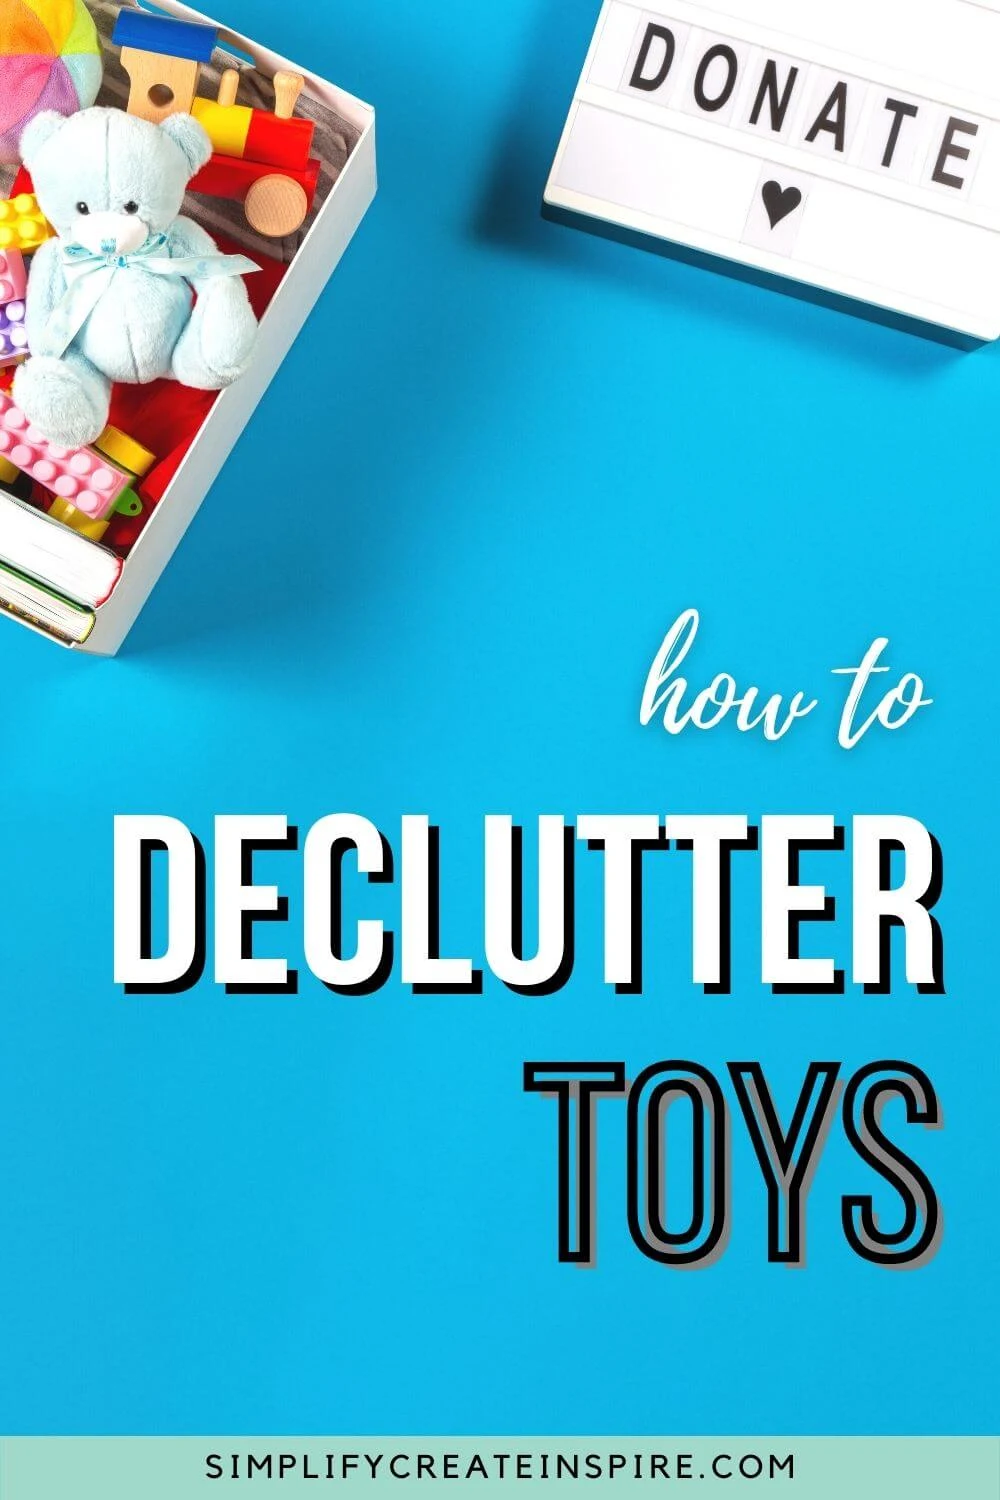 How to declutter toys - decluttering with kids